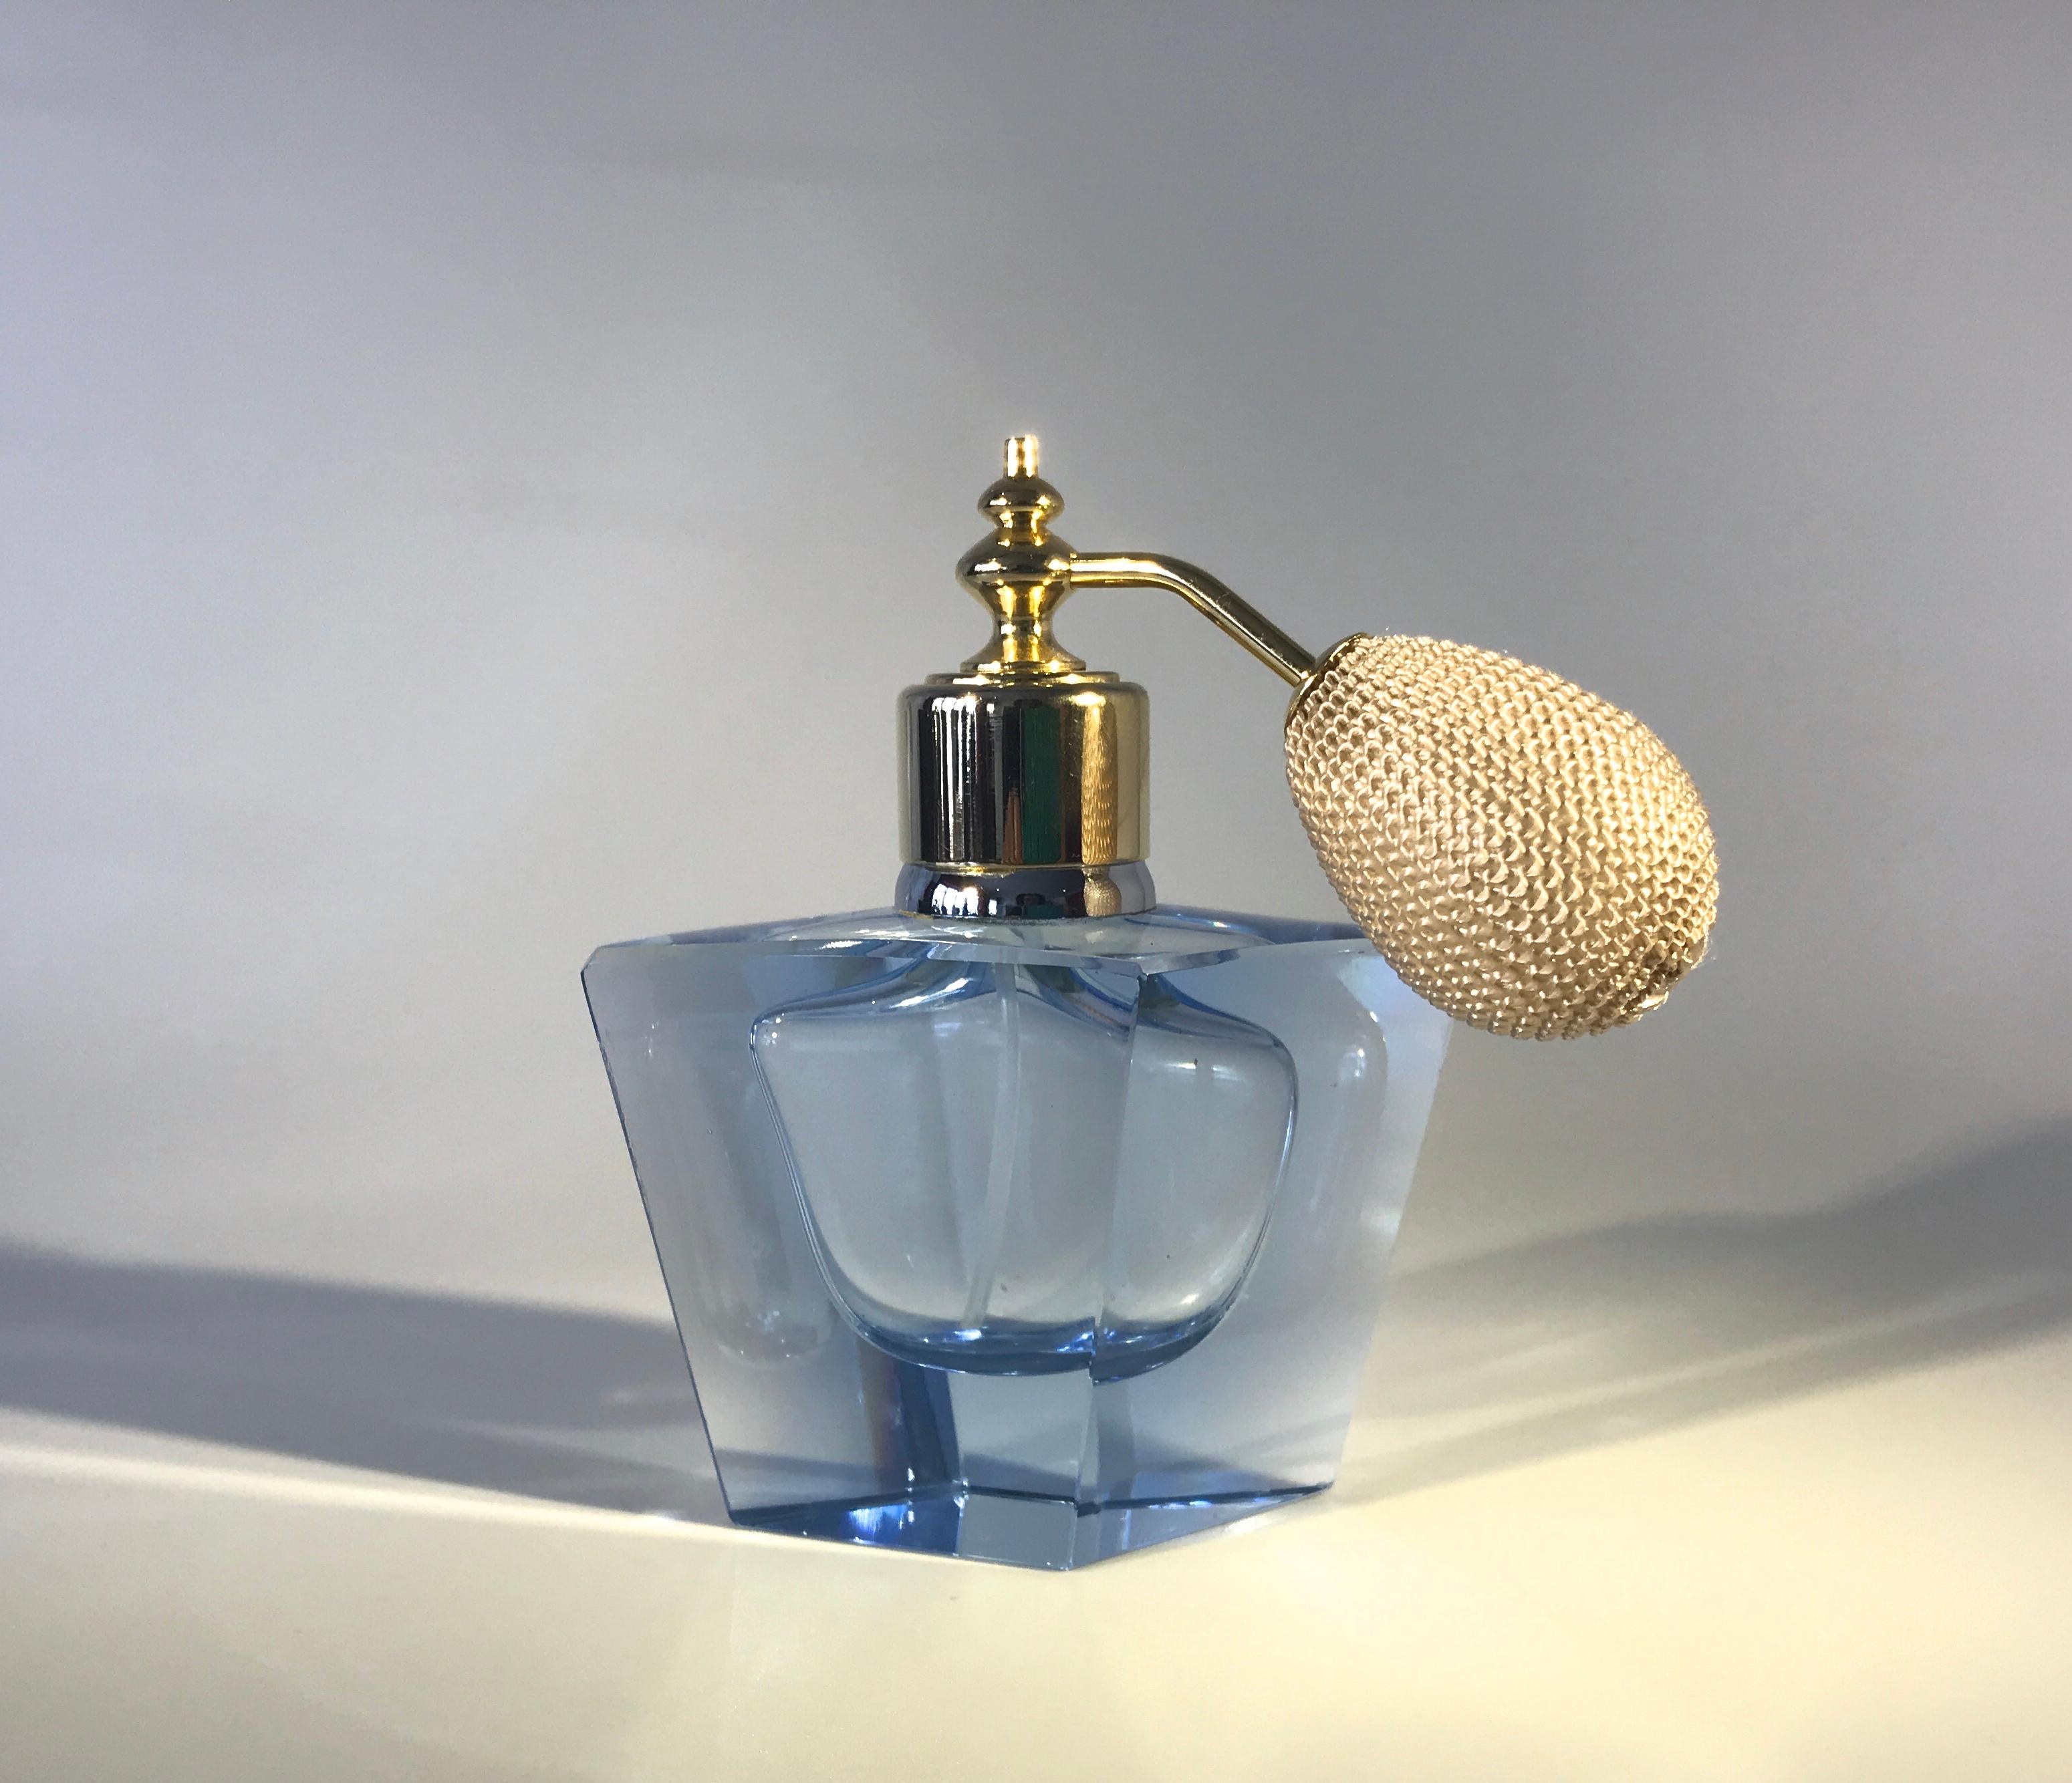 A sublime vintage blue crystal perfume atomizer and matching tray in the vogue of Art Deco.
Believed to be of West German origin, the clean lines of this duo is elegance exemplified,
circa 1960s
Atomizer measures: Height 4.25 inch, width 2.75